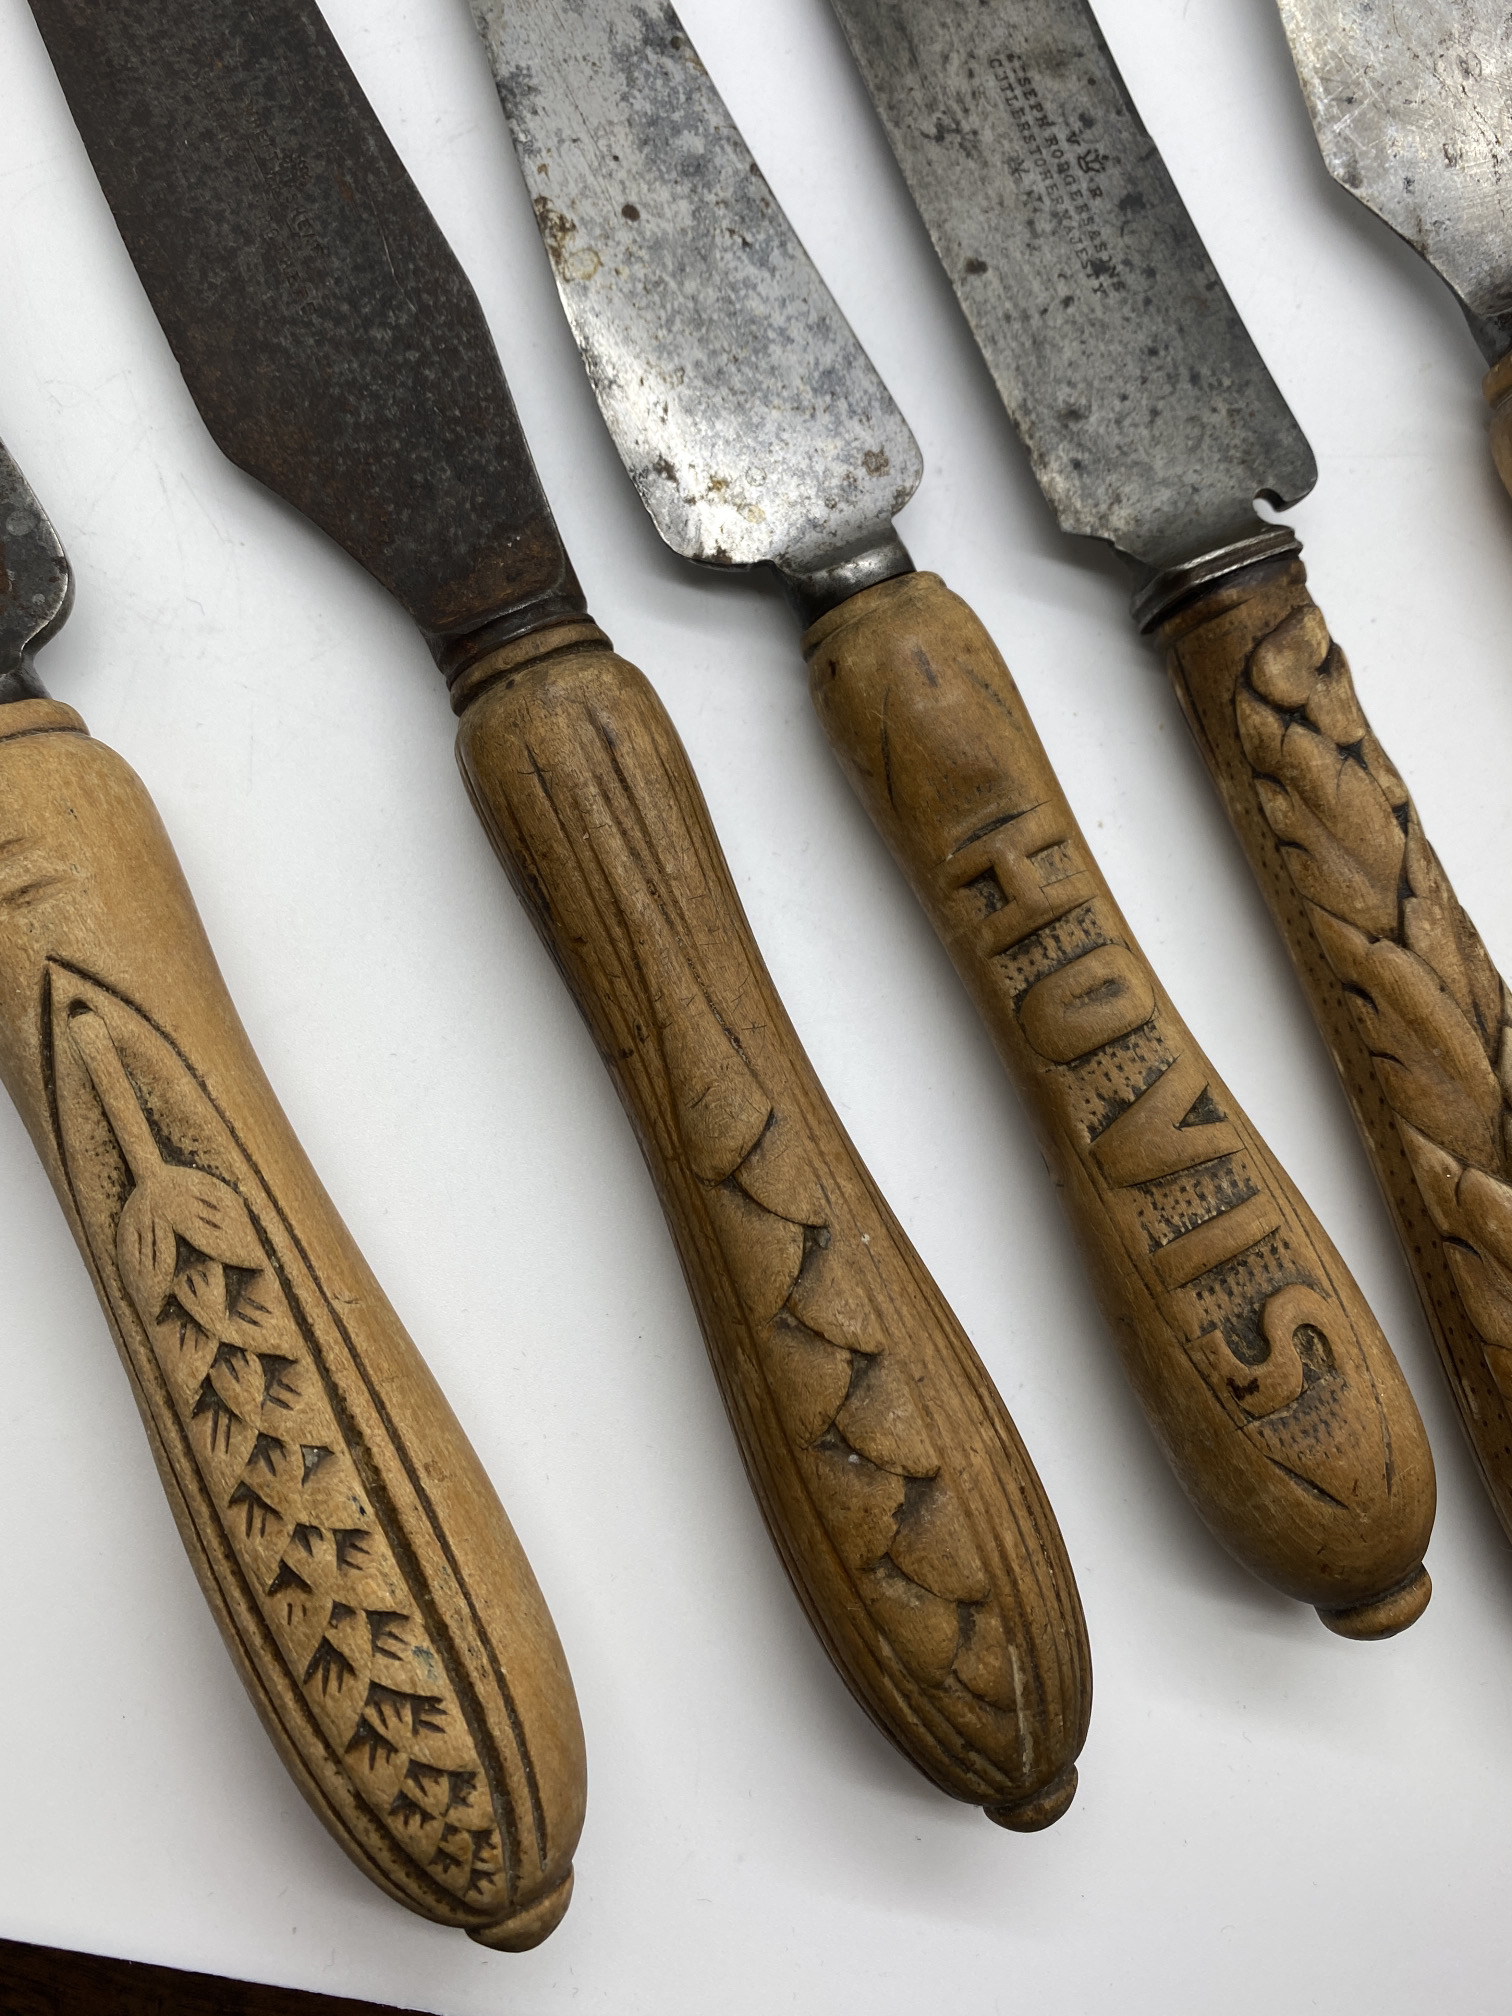 5 x ANTIQUE 1930's BREAD KNIVES INCLUDING HOVIS & BREAD - INC JOSEPH RODGERS - WHEAT SHEAF ETC - Image 4 of 14